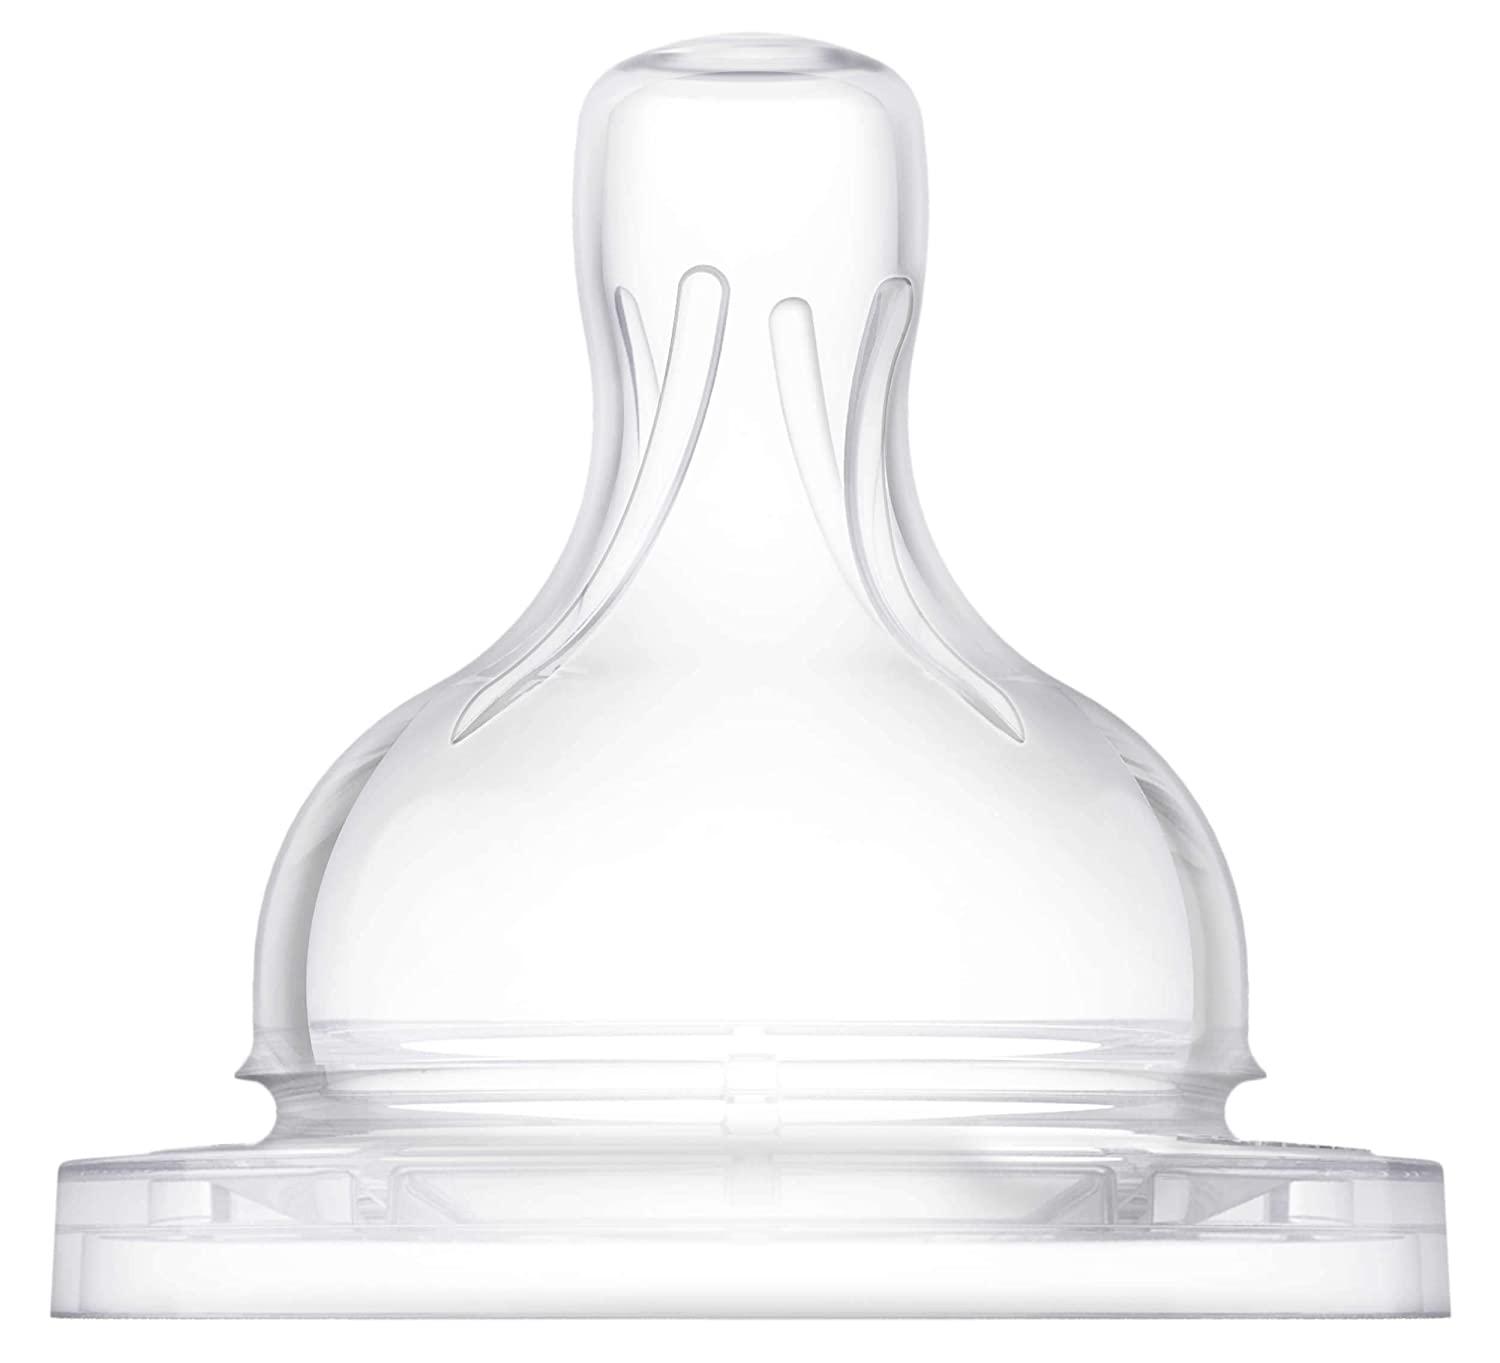 Philips Avent 2 Pack Classic Variable Flow Nipple, 3M +